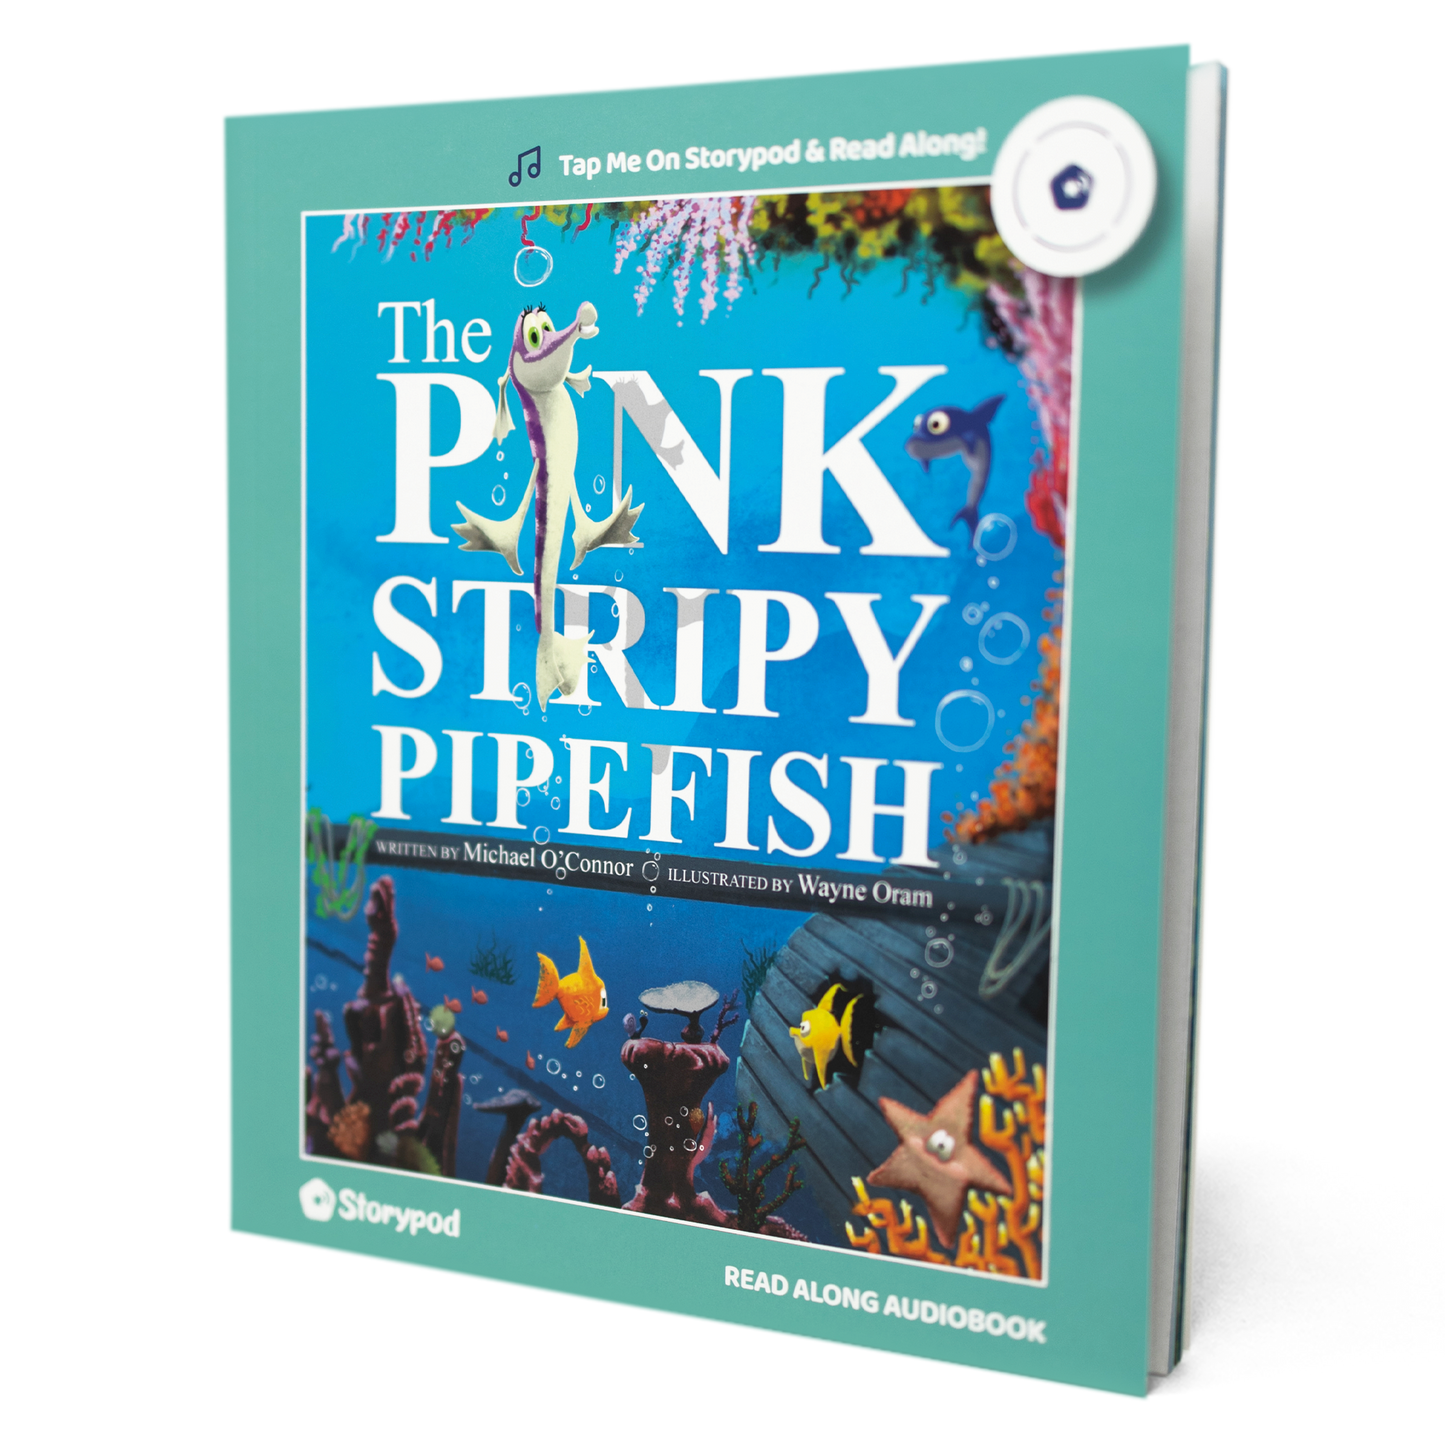 The Pink Stripy Pipefish